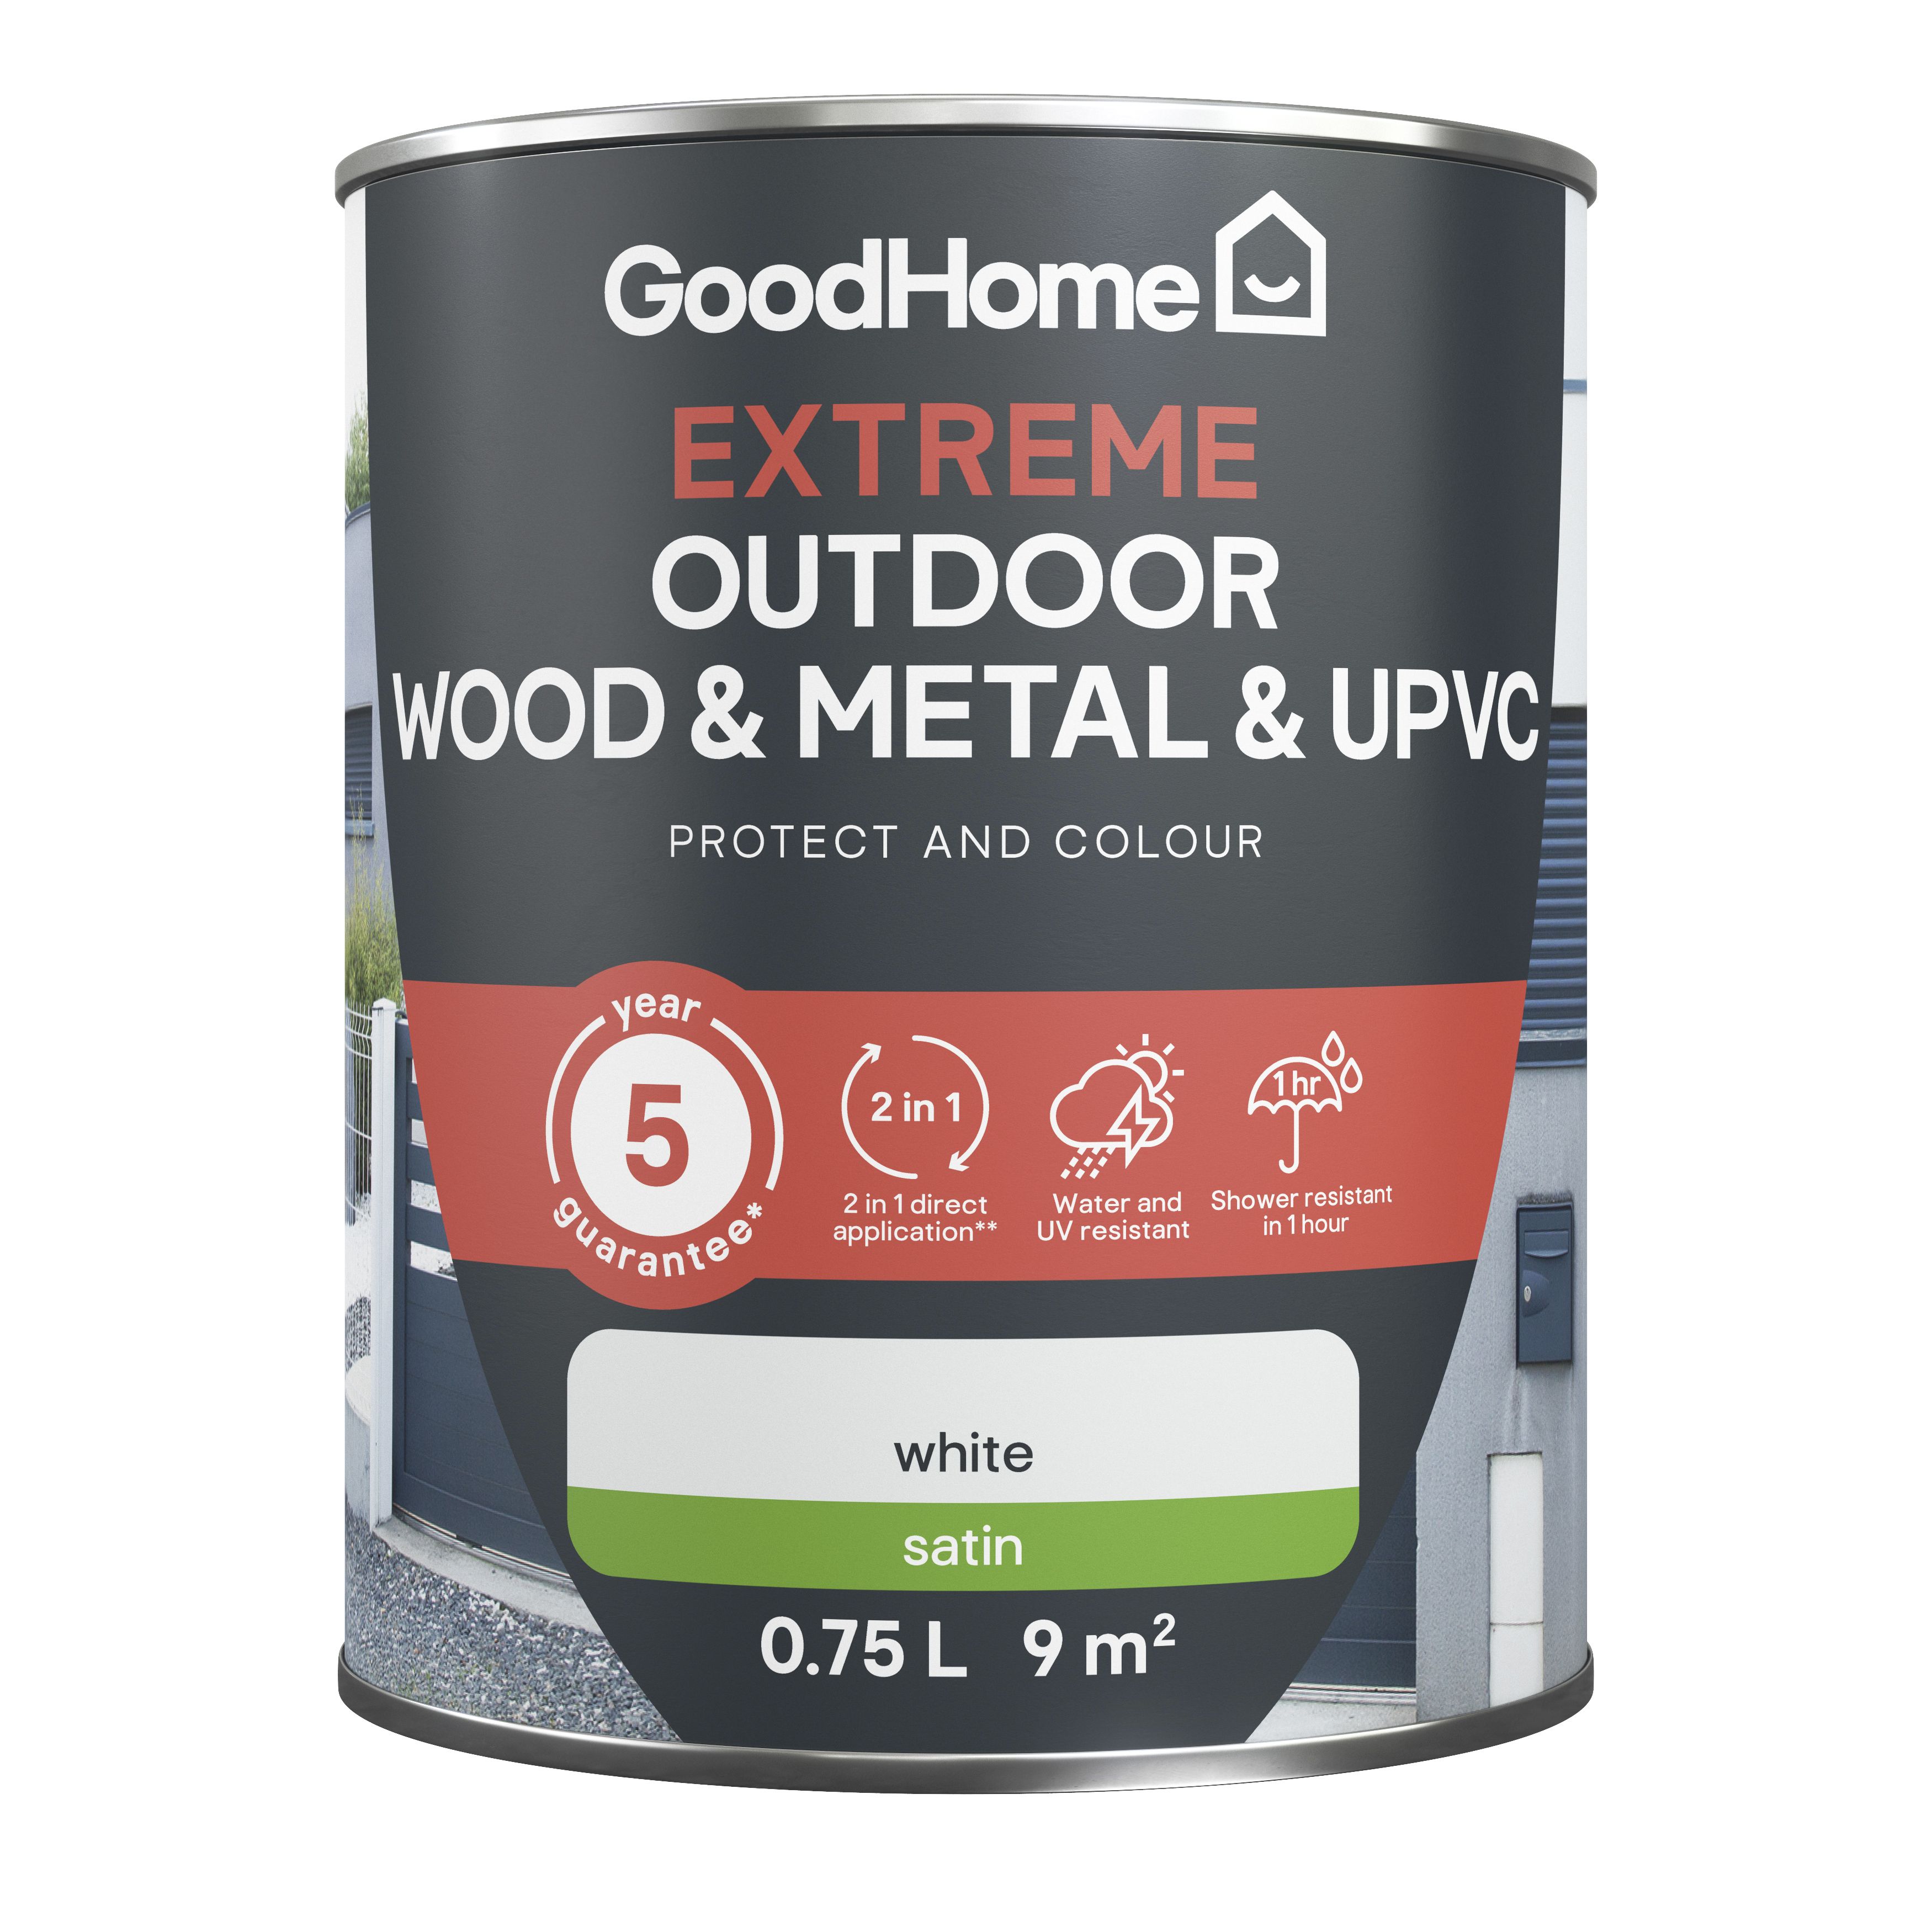 GoodHome Extreme Outdoor White Satinwood Multi-surface paint, 750ml